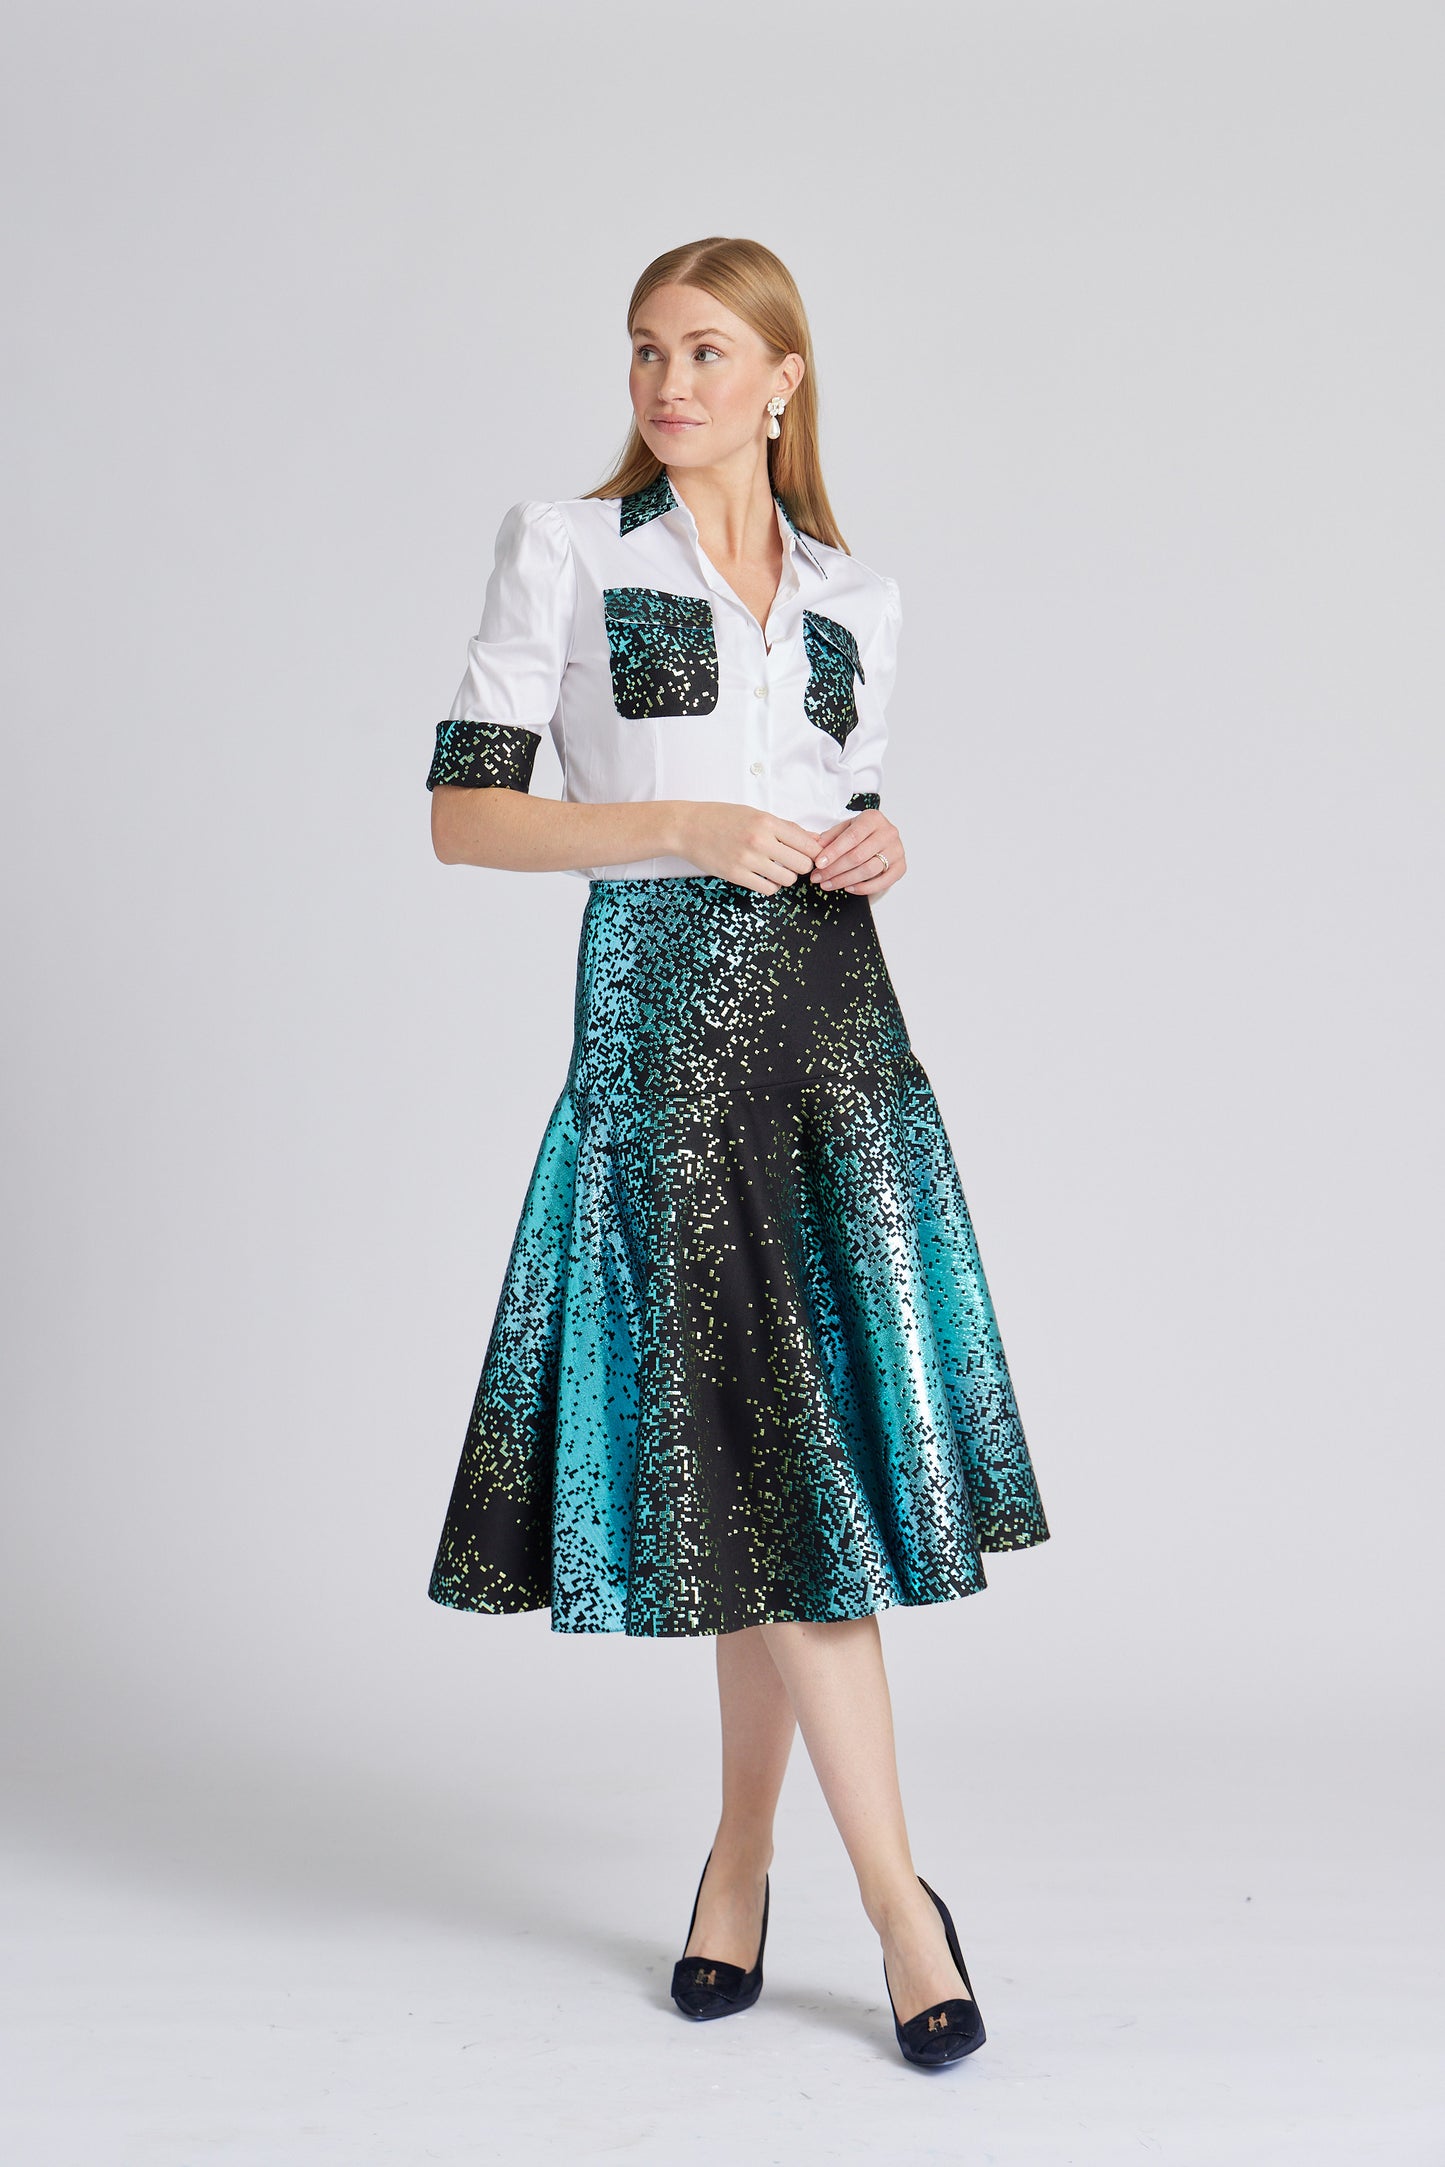 Fancy Camelia Shirt in Green Sparkle